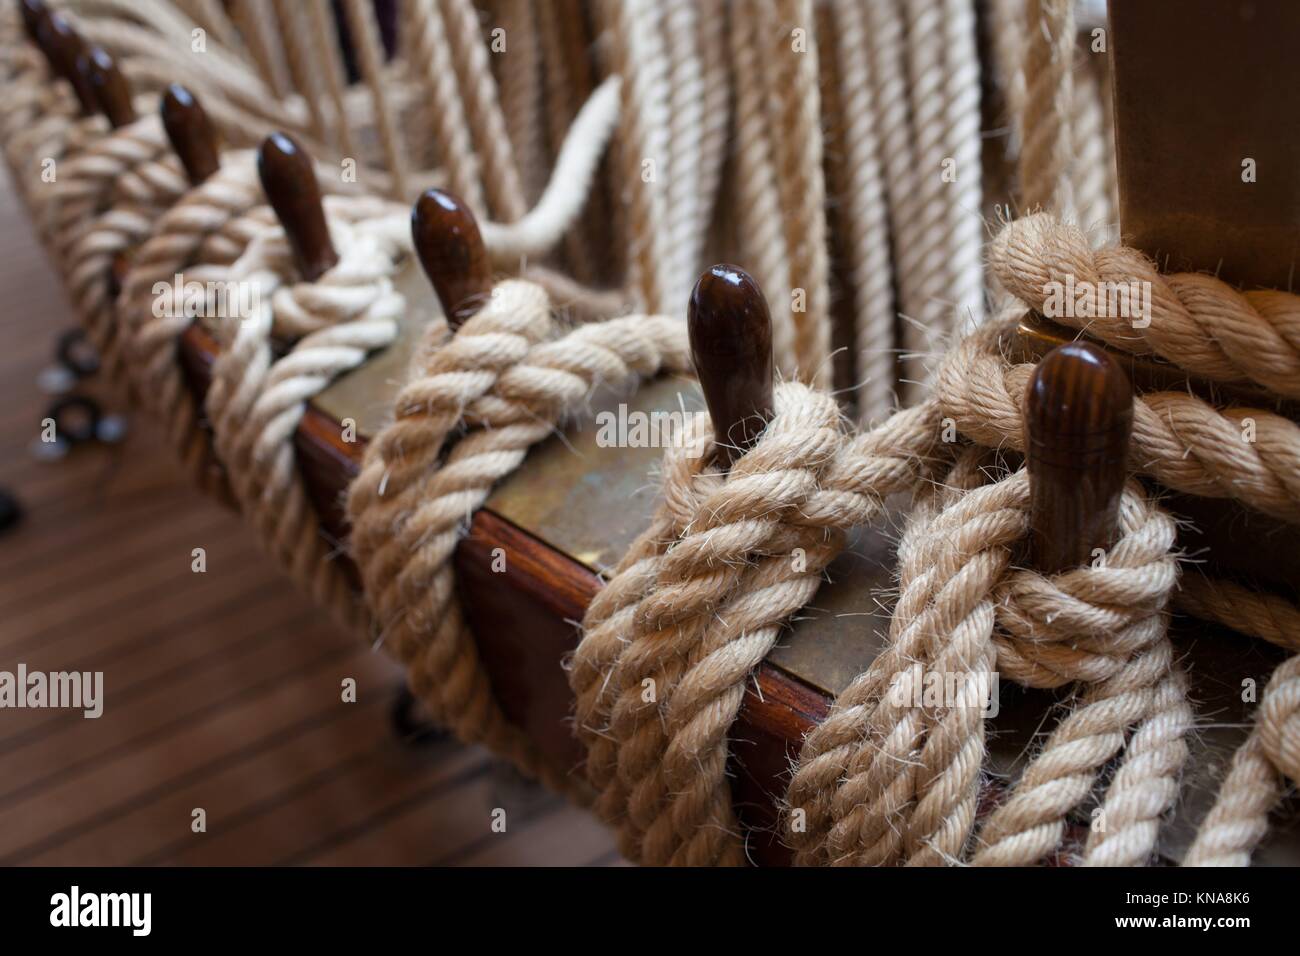 Hemp ropes tied to wooden beams, part of the rigging system of old sailboat, controling sails. Stock Photo